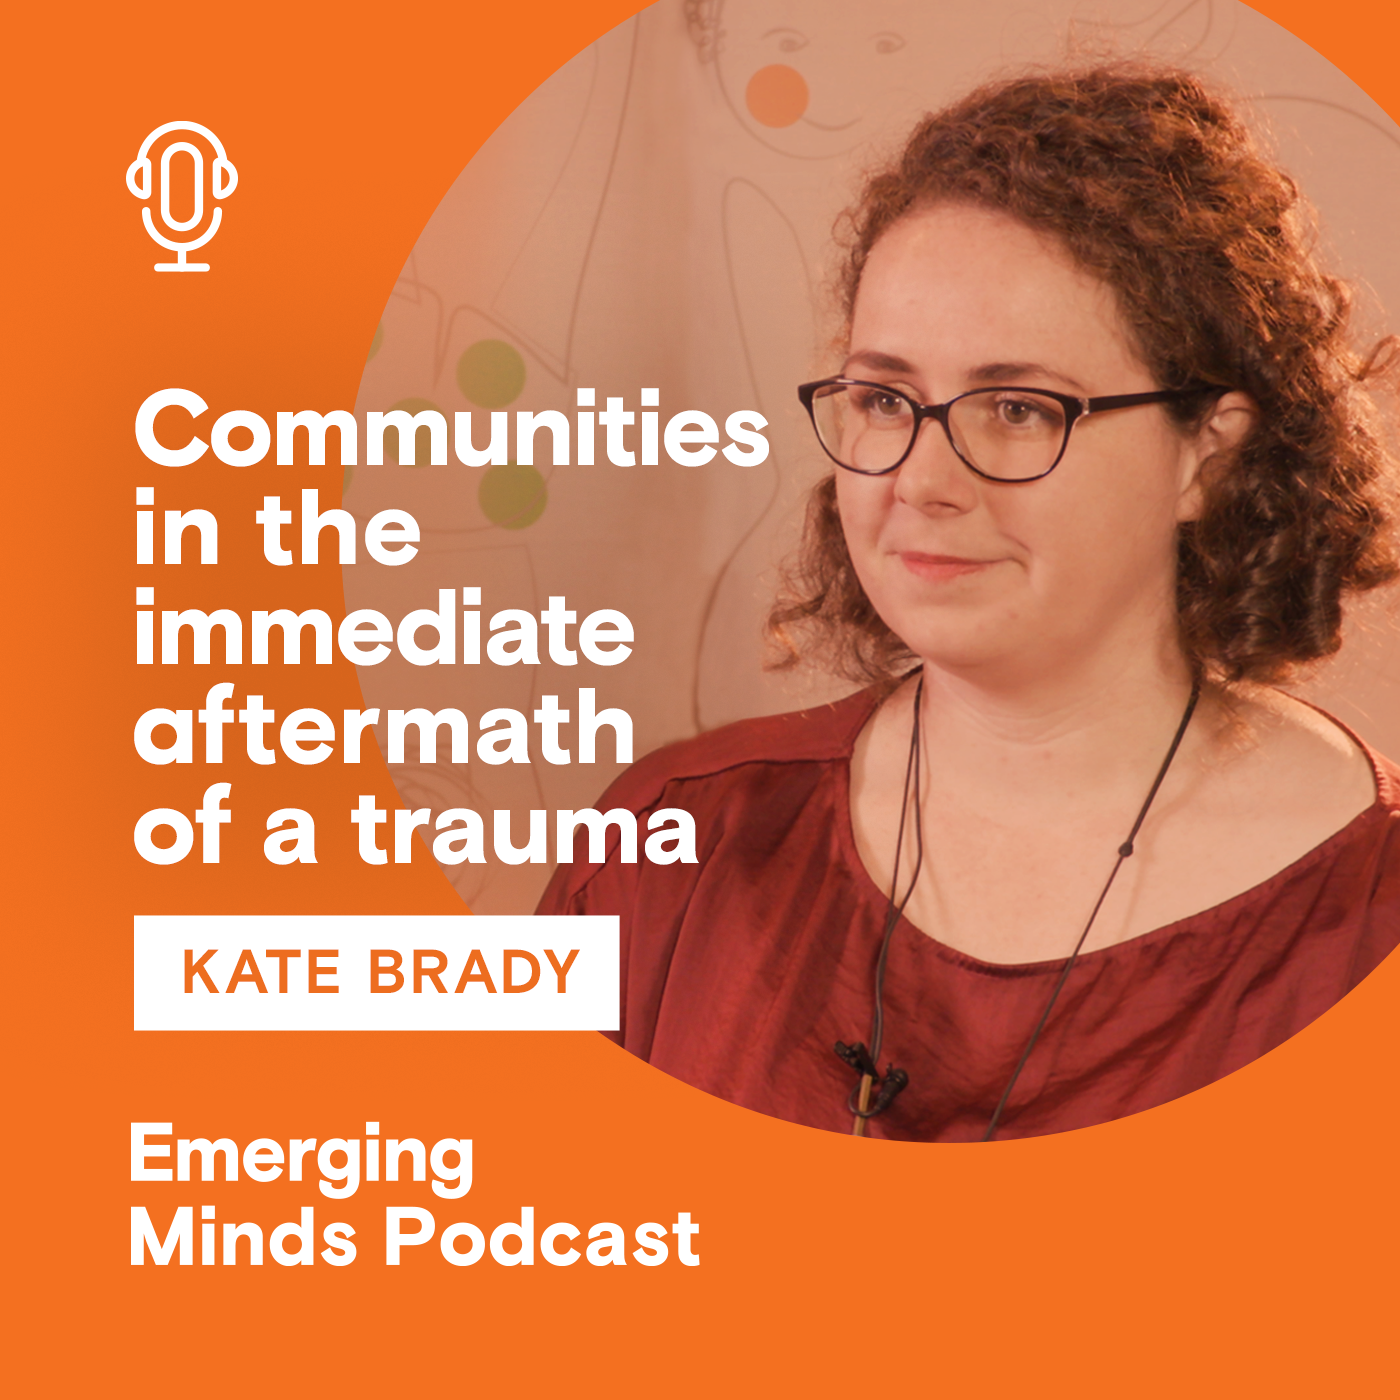 Re-release - Communities in the immediate aftermath of a trauma